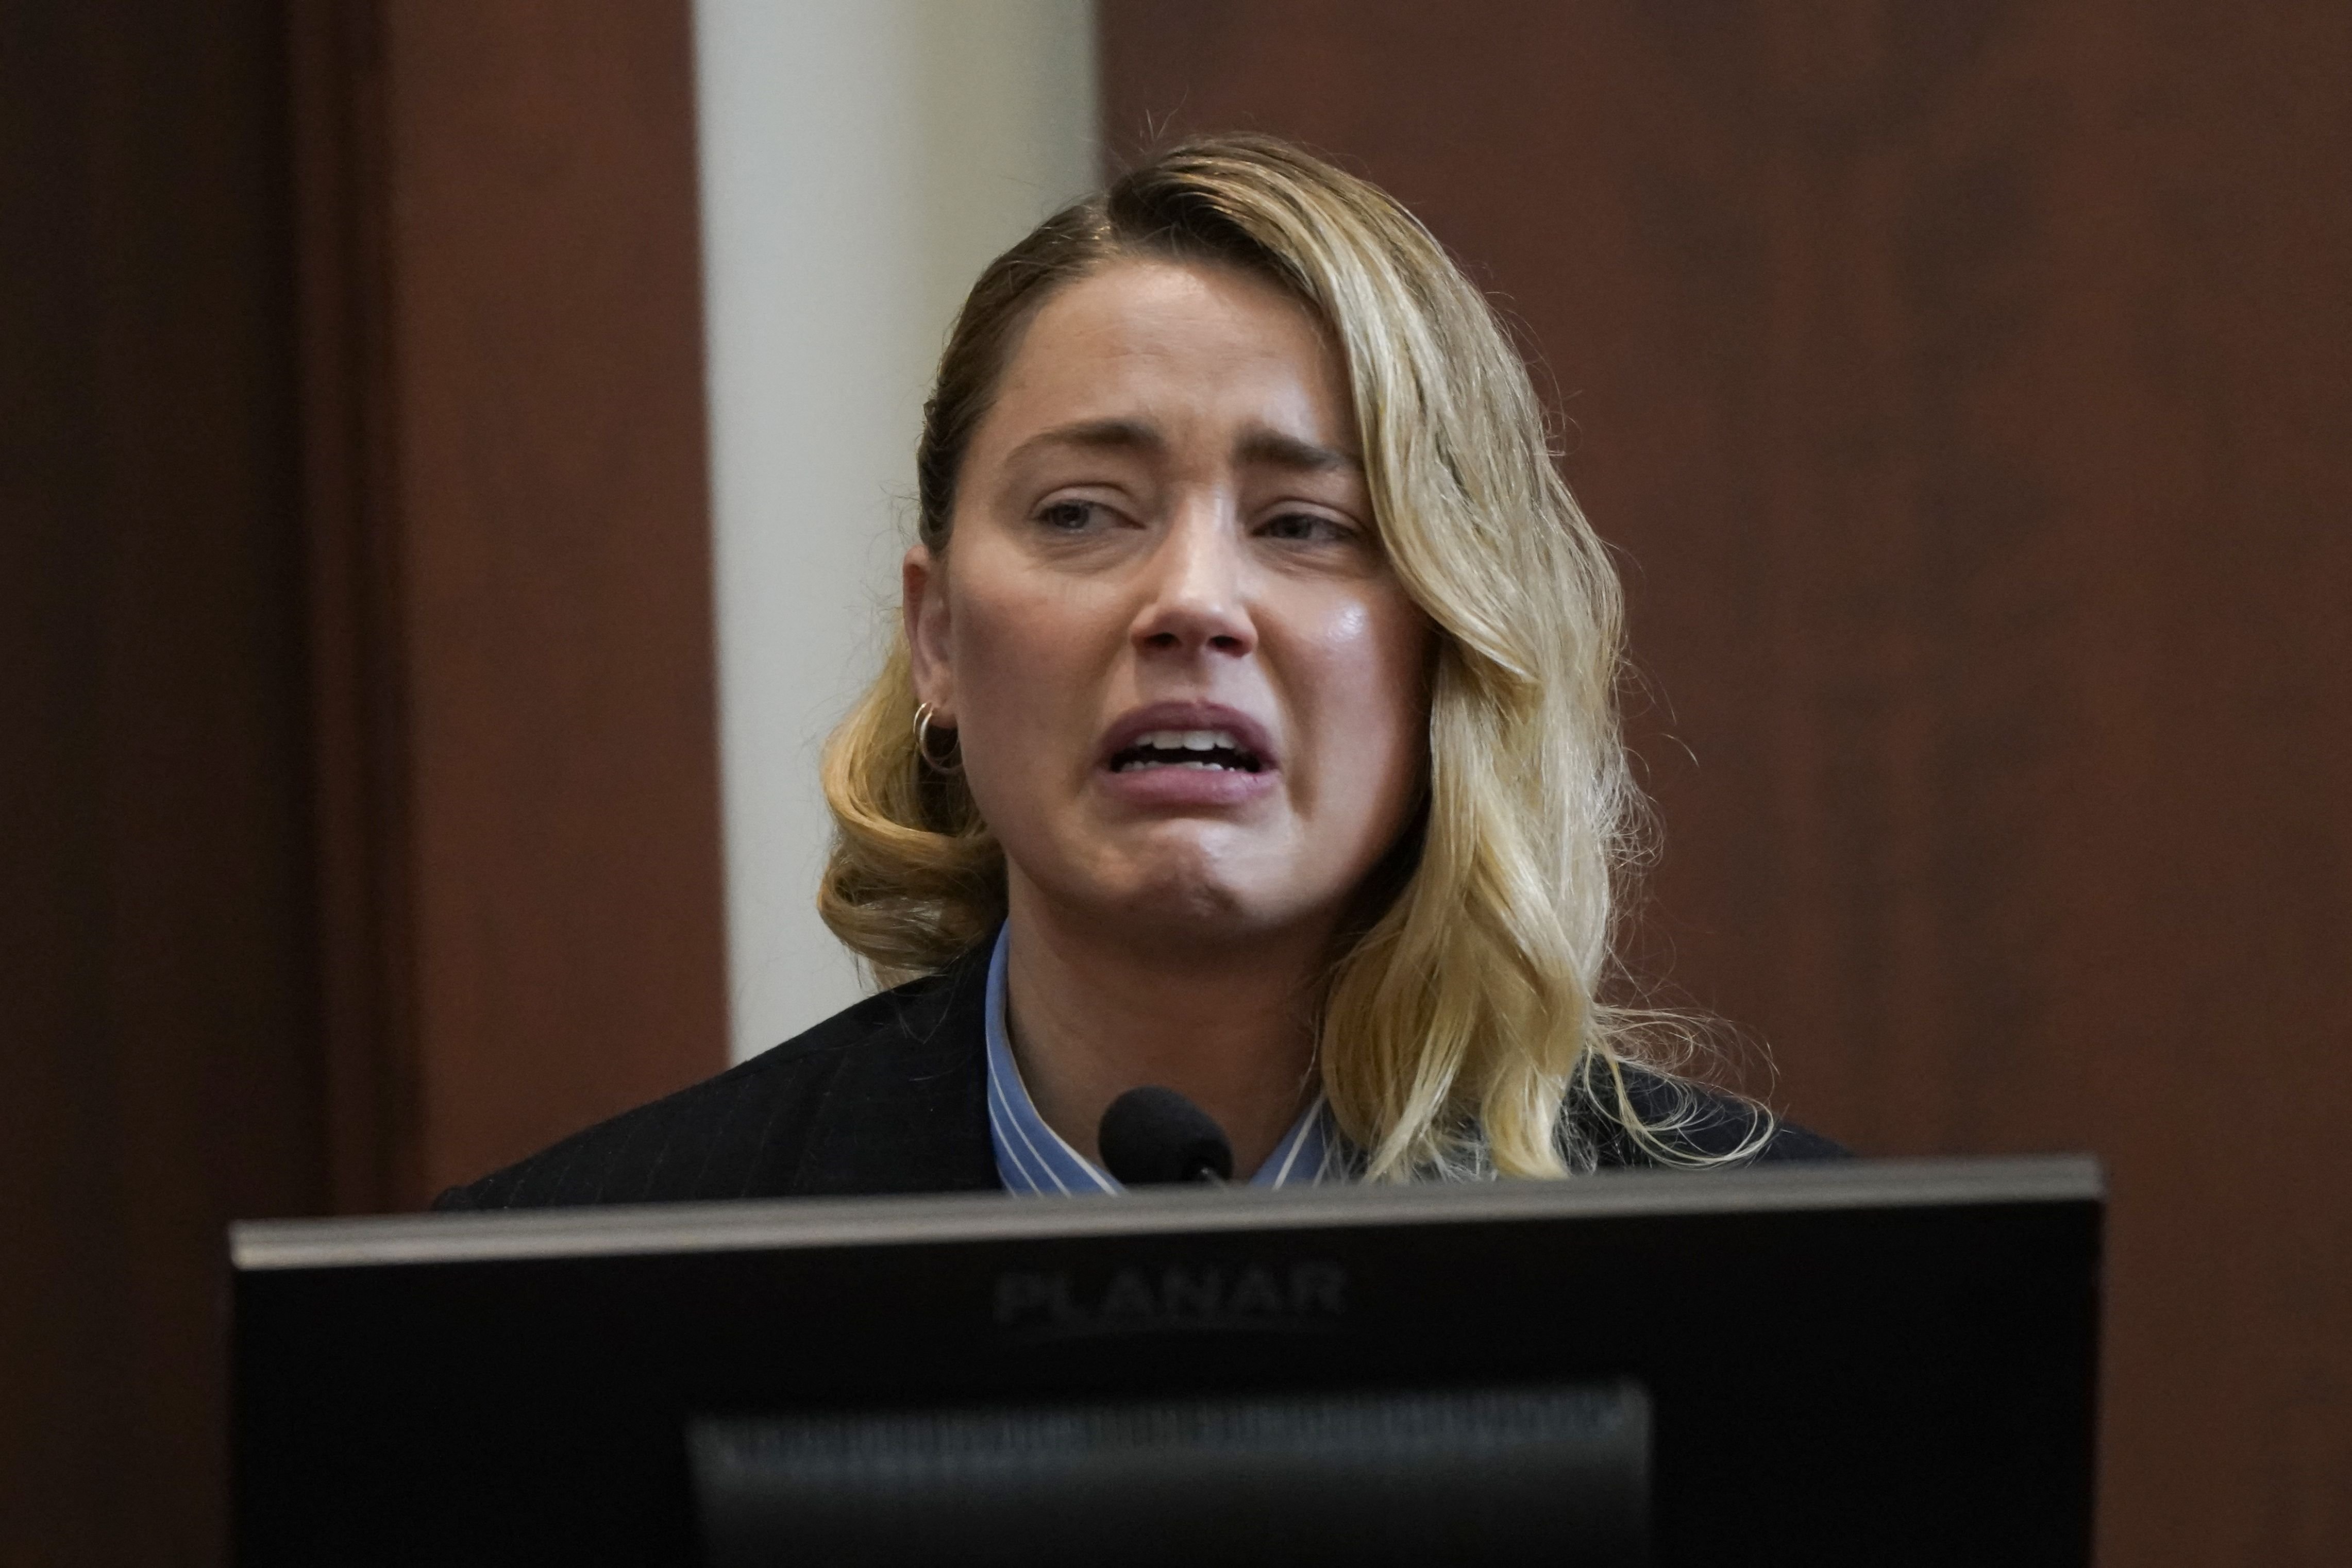 Amber Heard testifies at Fairfax County Circuit Court during a defamation case against Johnny Depp in Fairfax, Virginia, on May 4, 2022. | Source: Getty Images